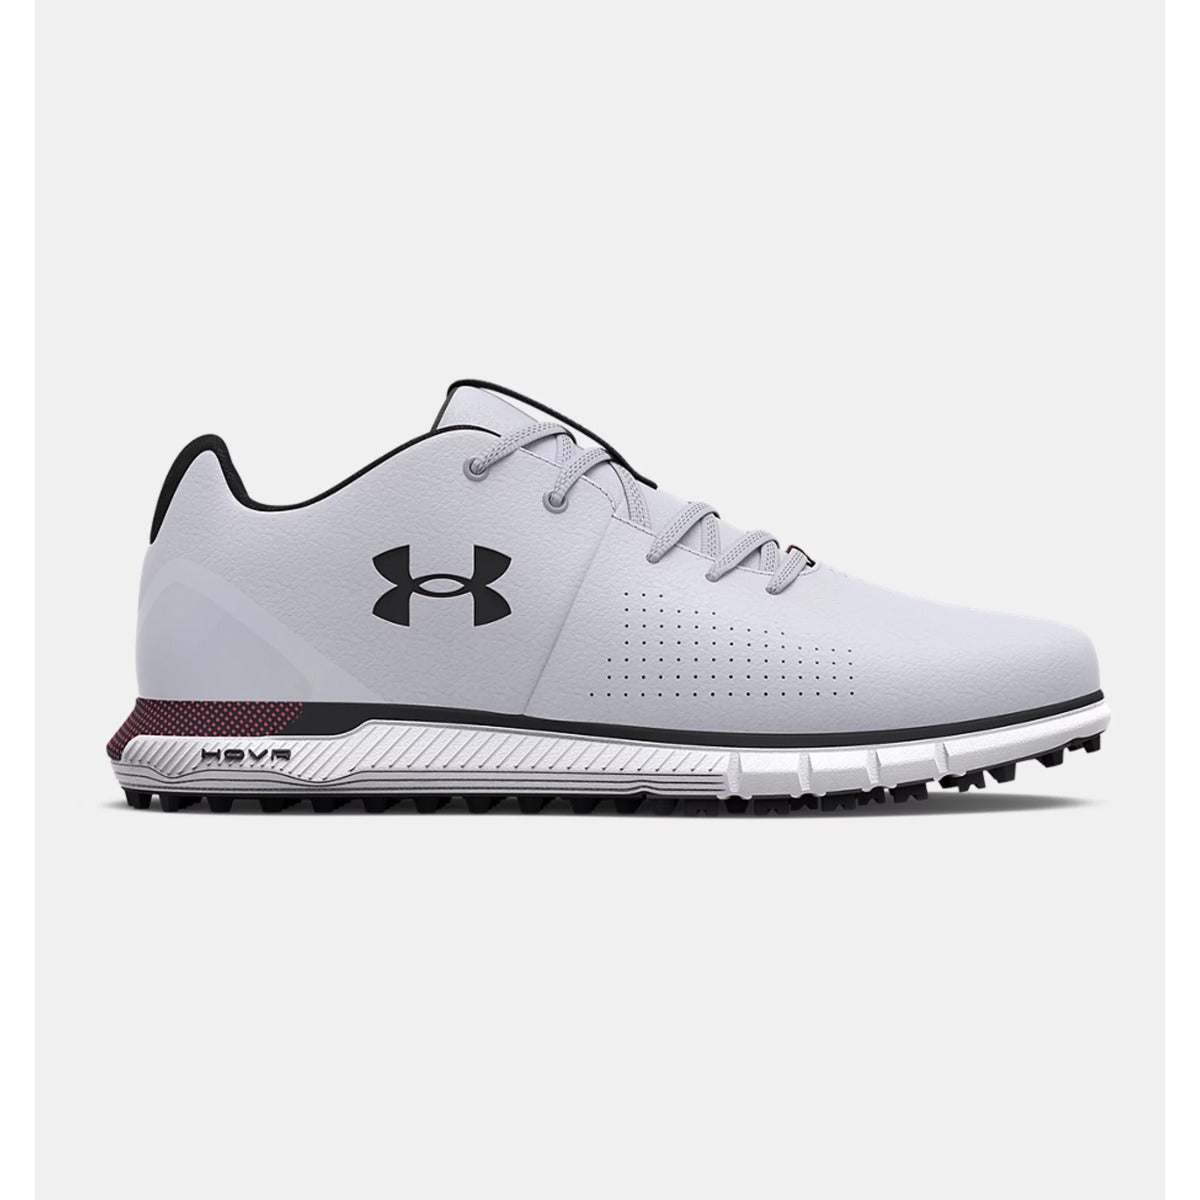 Under Armour HOVR Fade 2 Spikeless Wide Golf Shoes Mens (Grey 102)